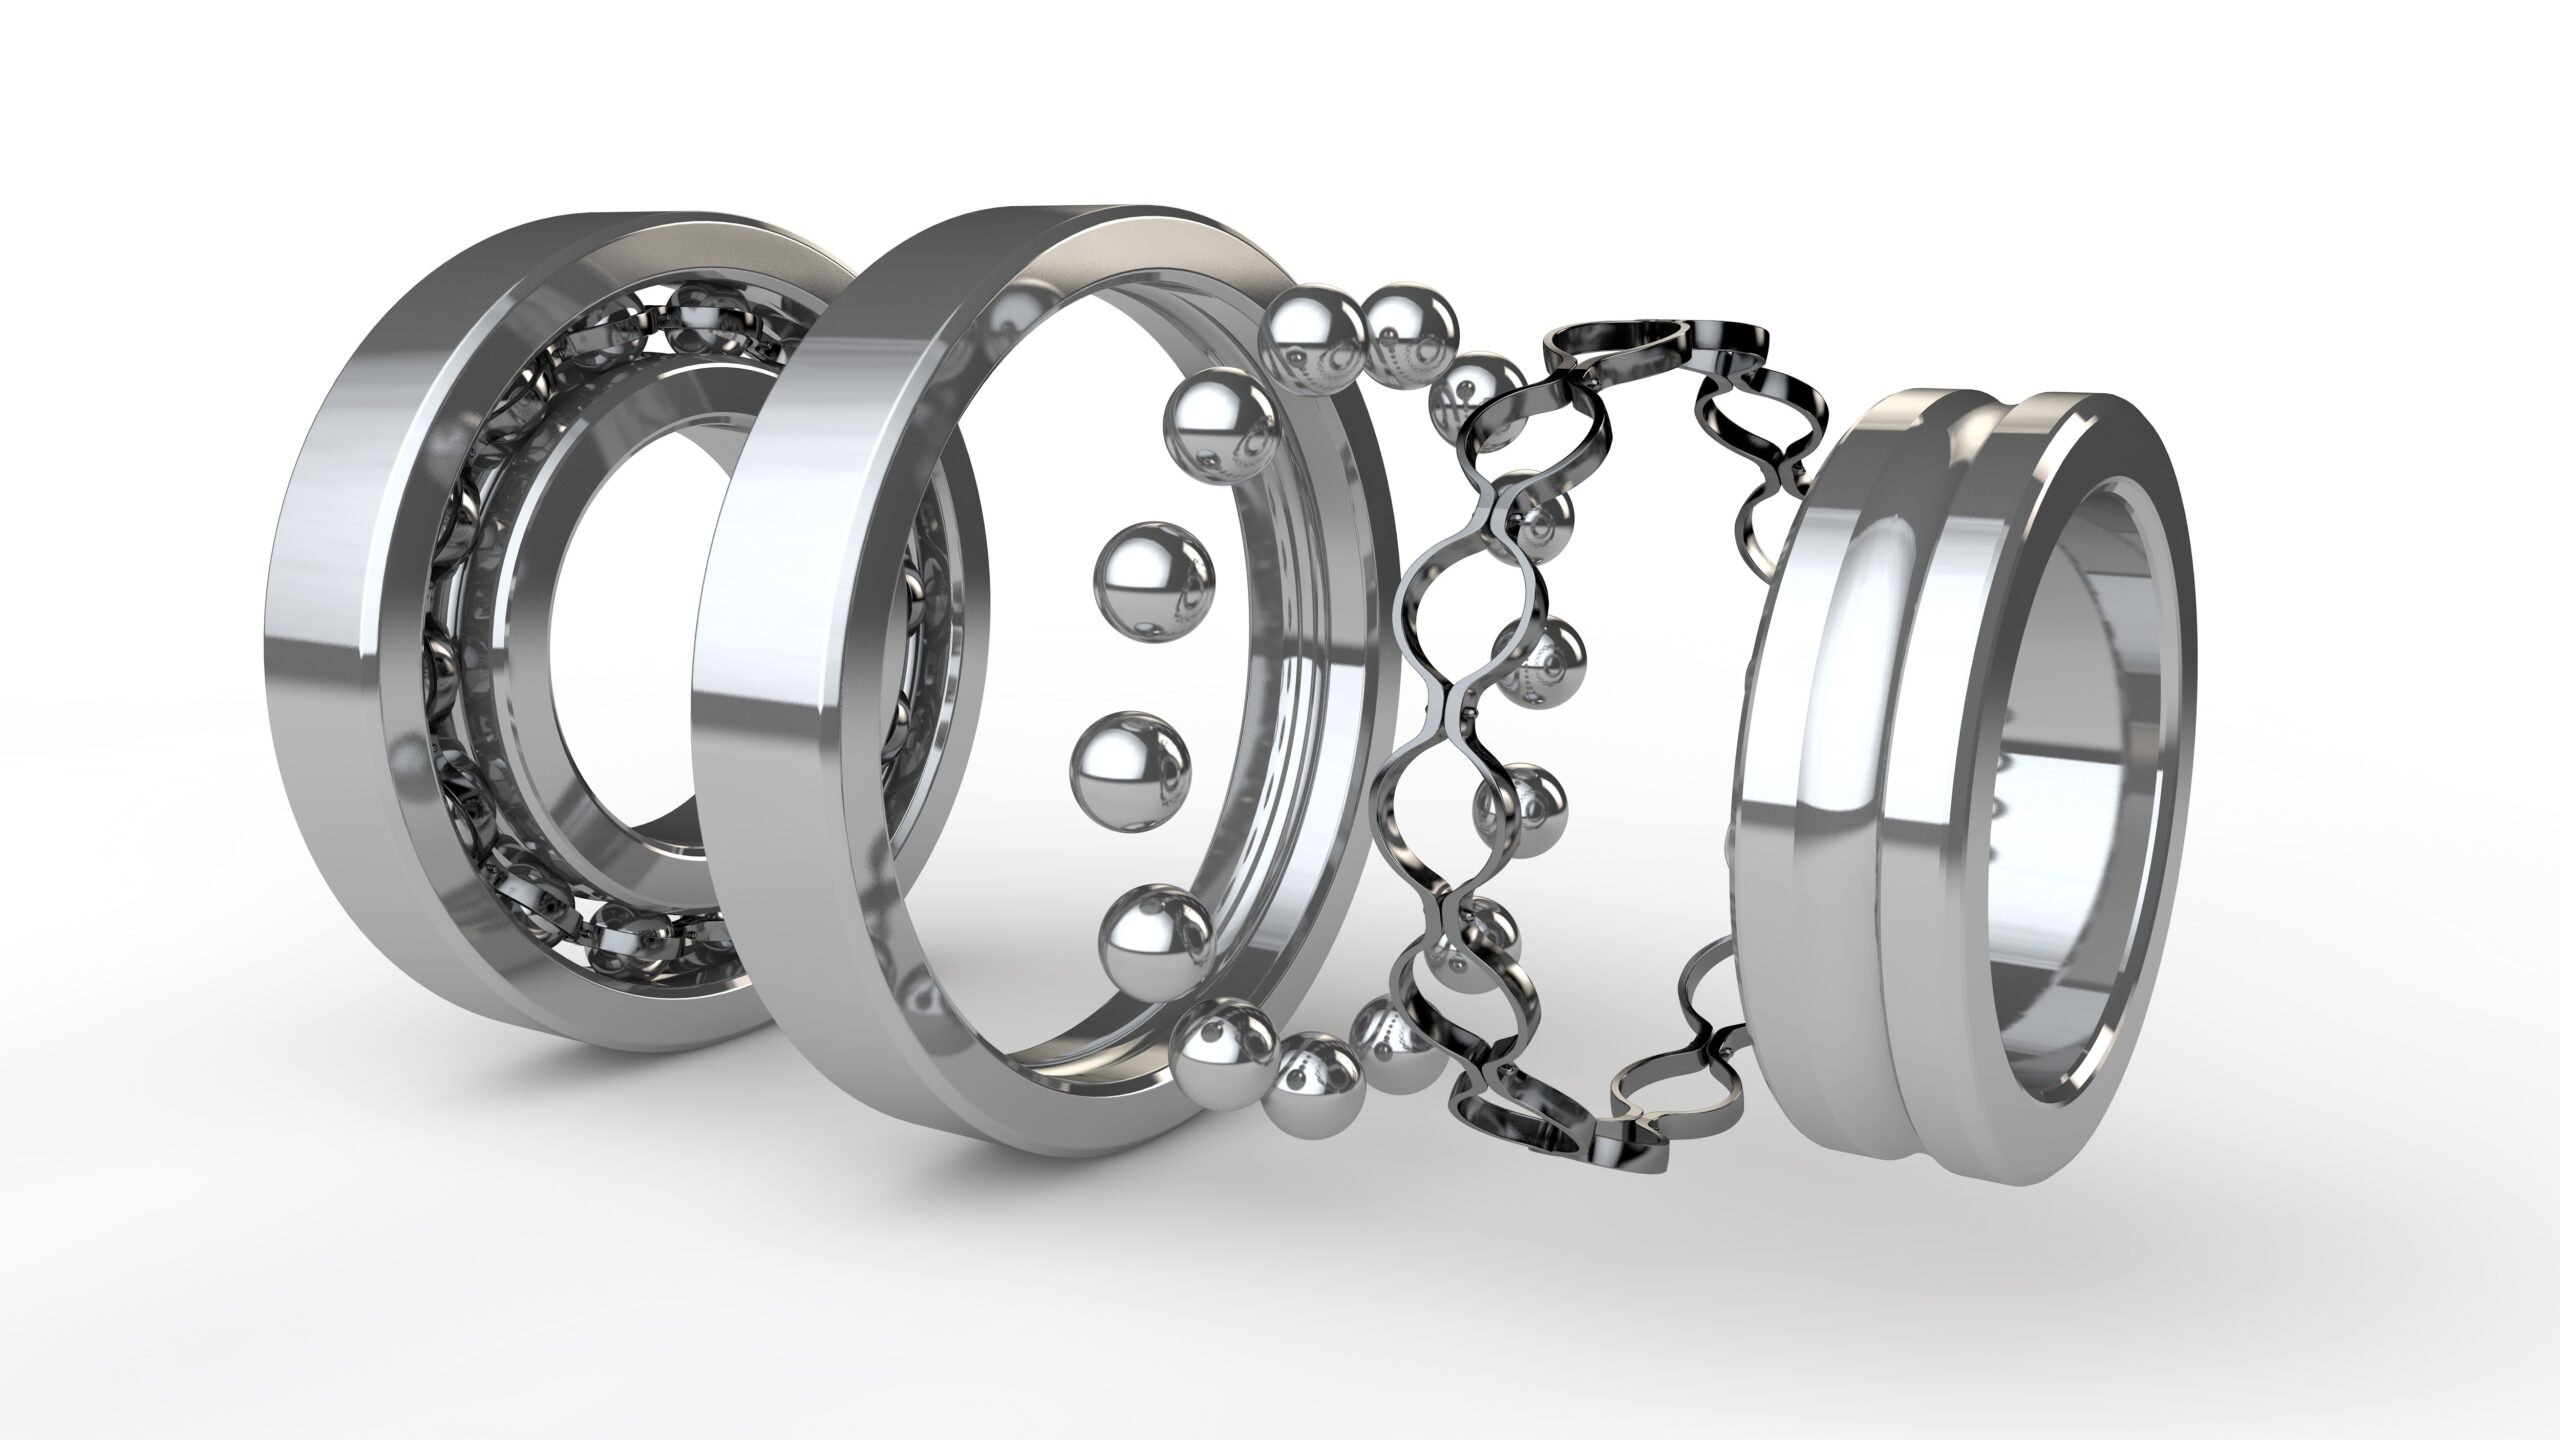 Benefits of using high-quality bearings in industry